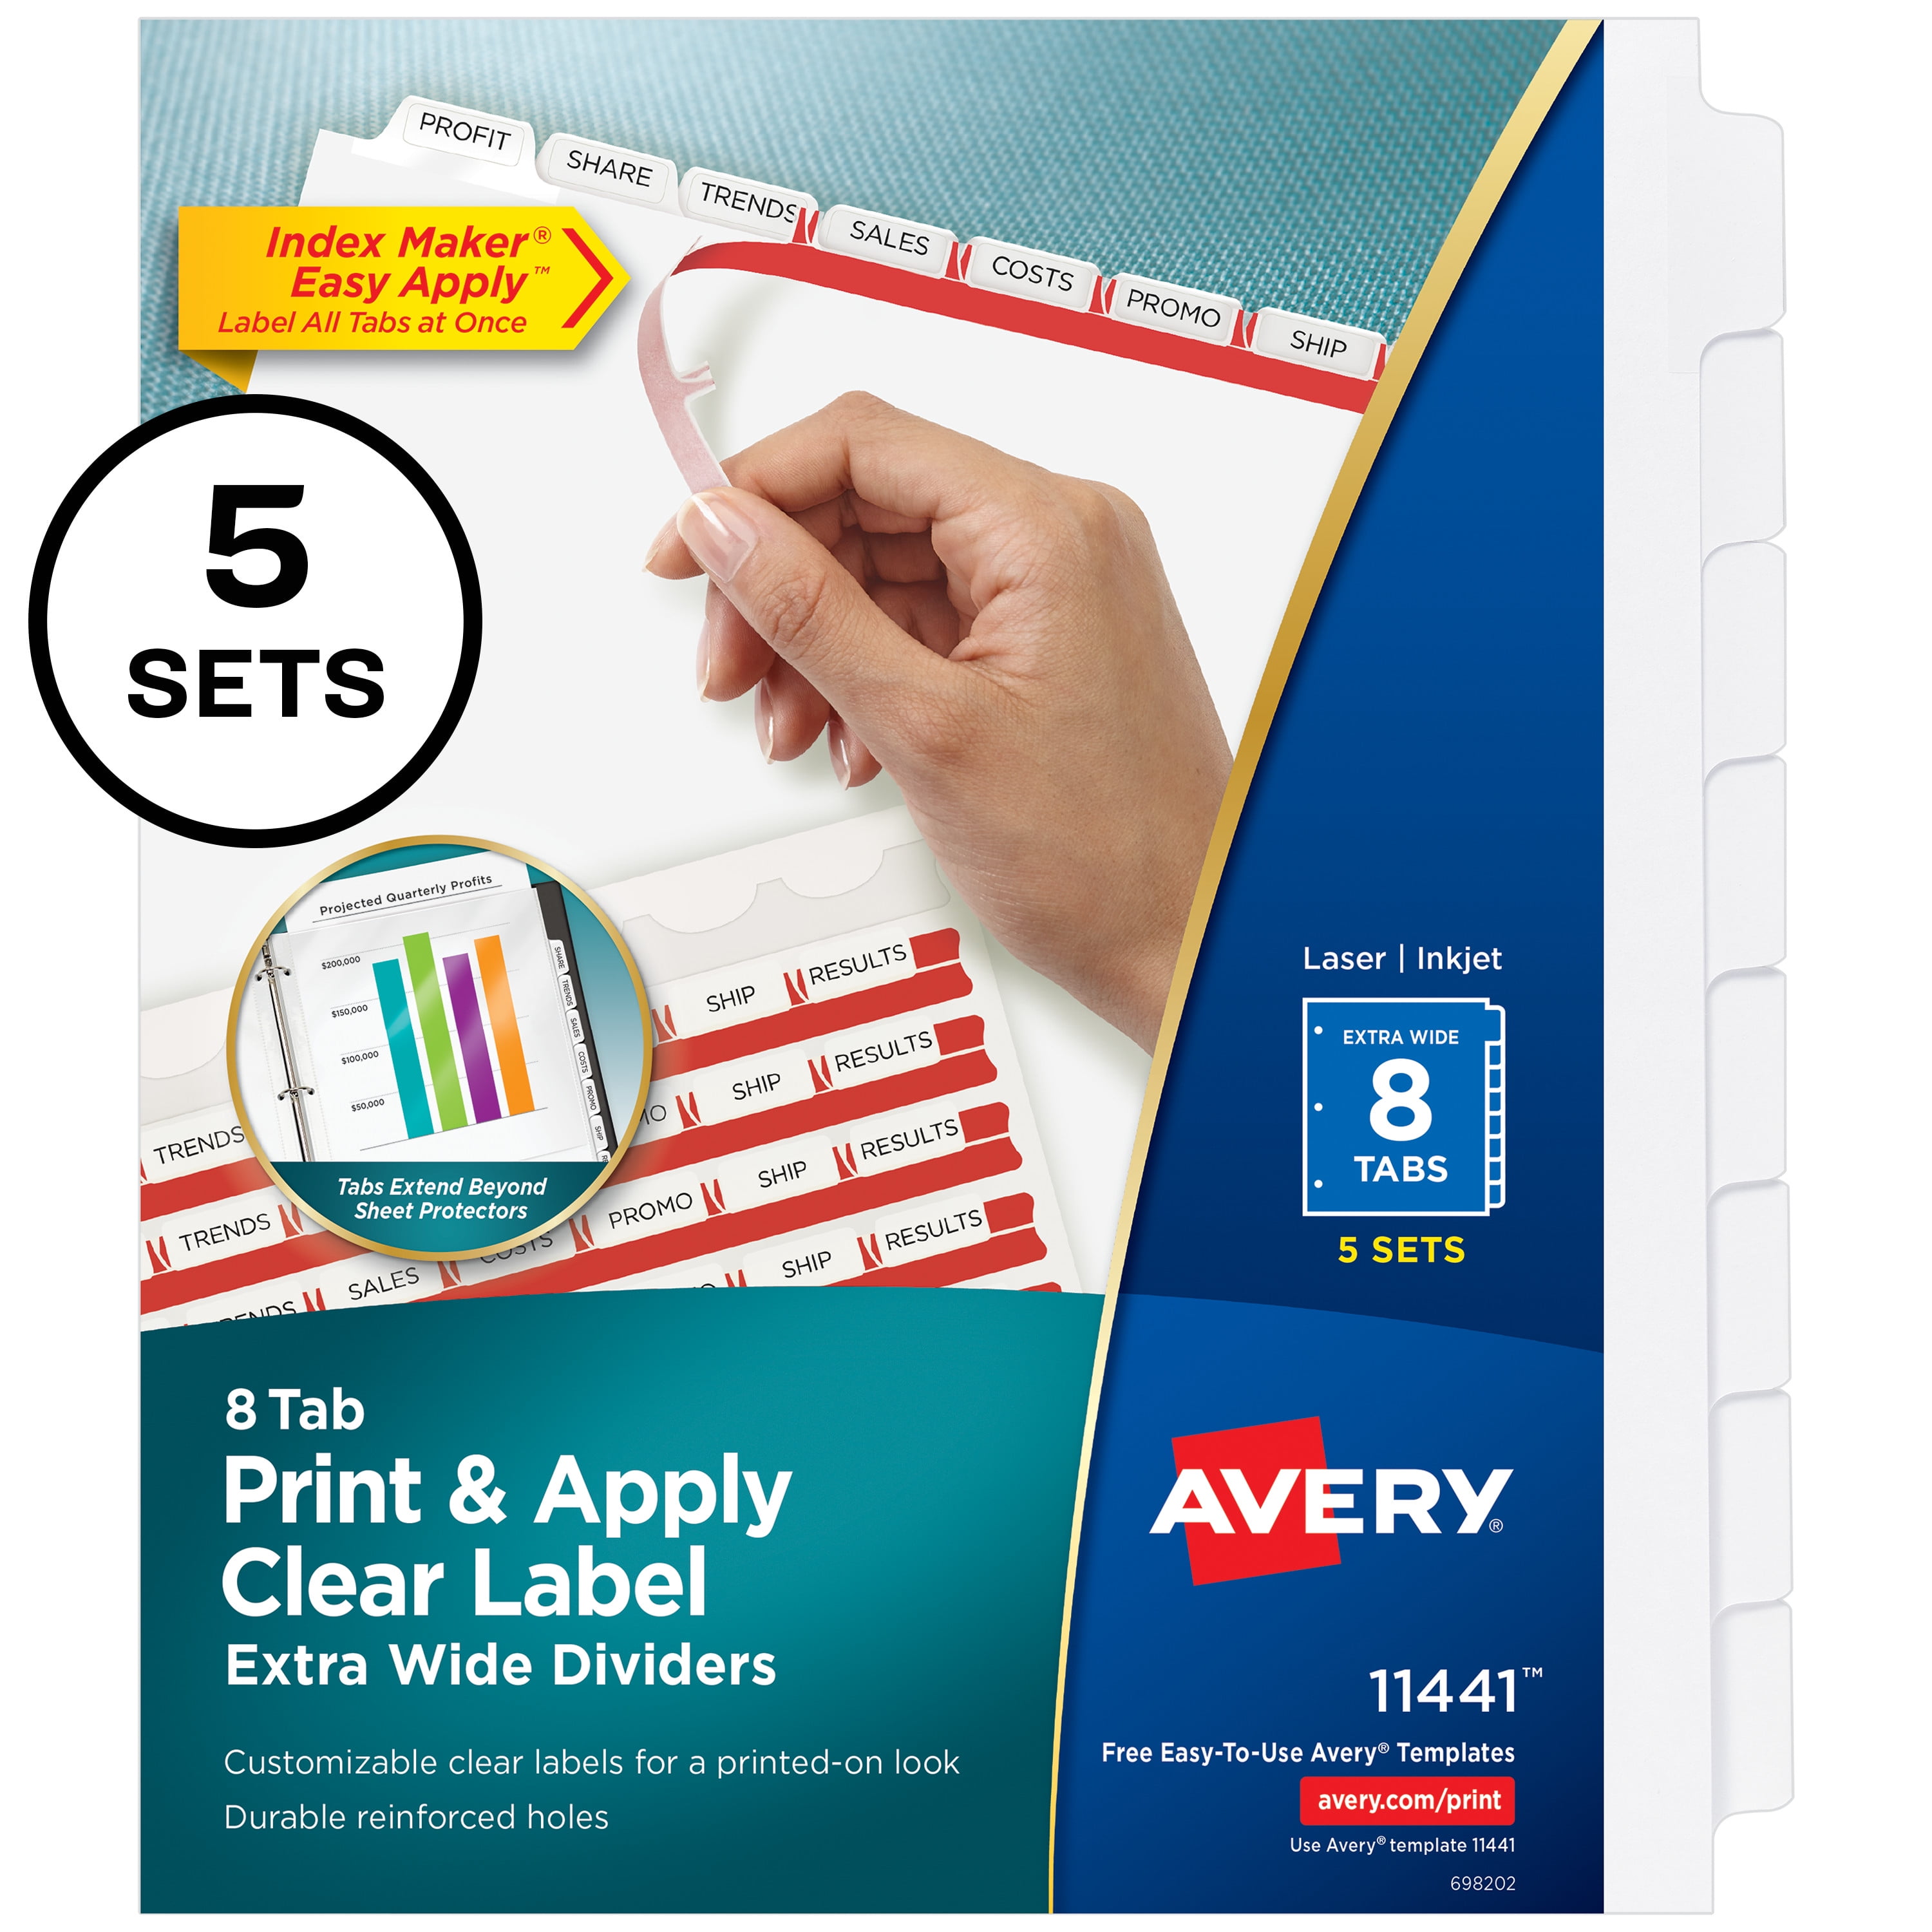 Avery Print & Apply Clear Label Extra-Wide Dividers, Index Maker Easy Apply Label Strip, 8 White Tabs, 5 Sets (11441) - Walmart.com